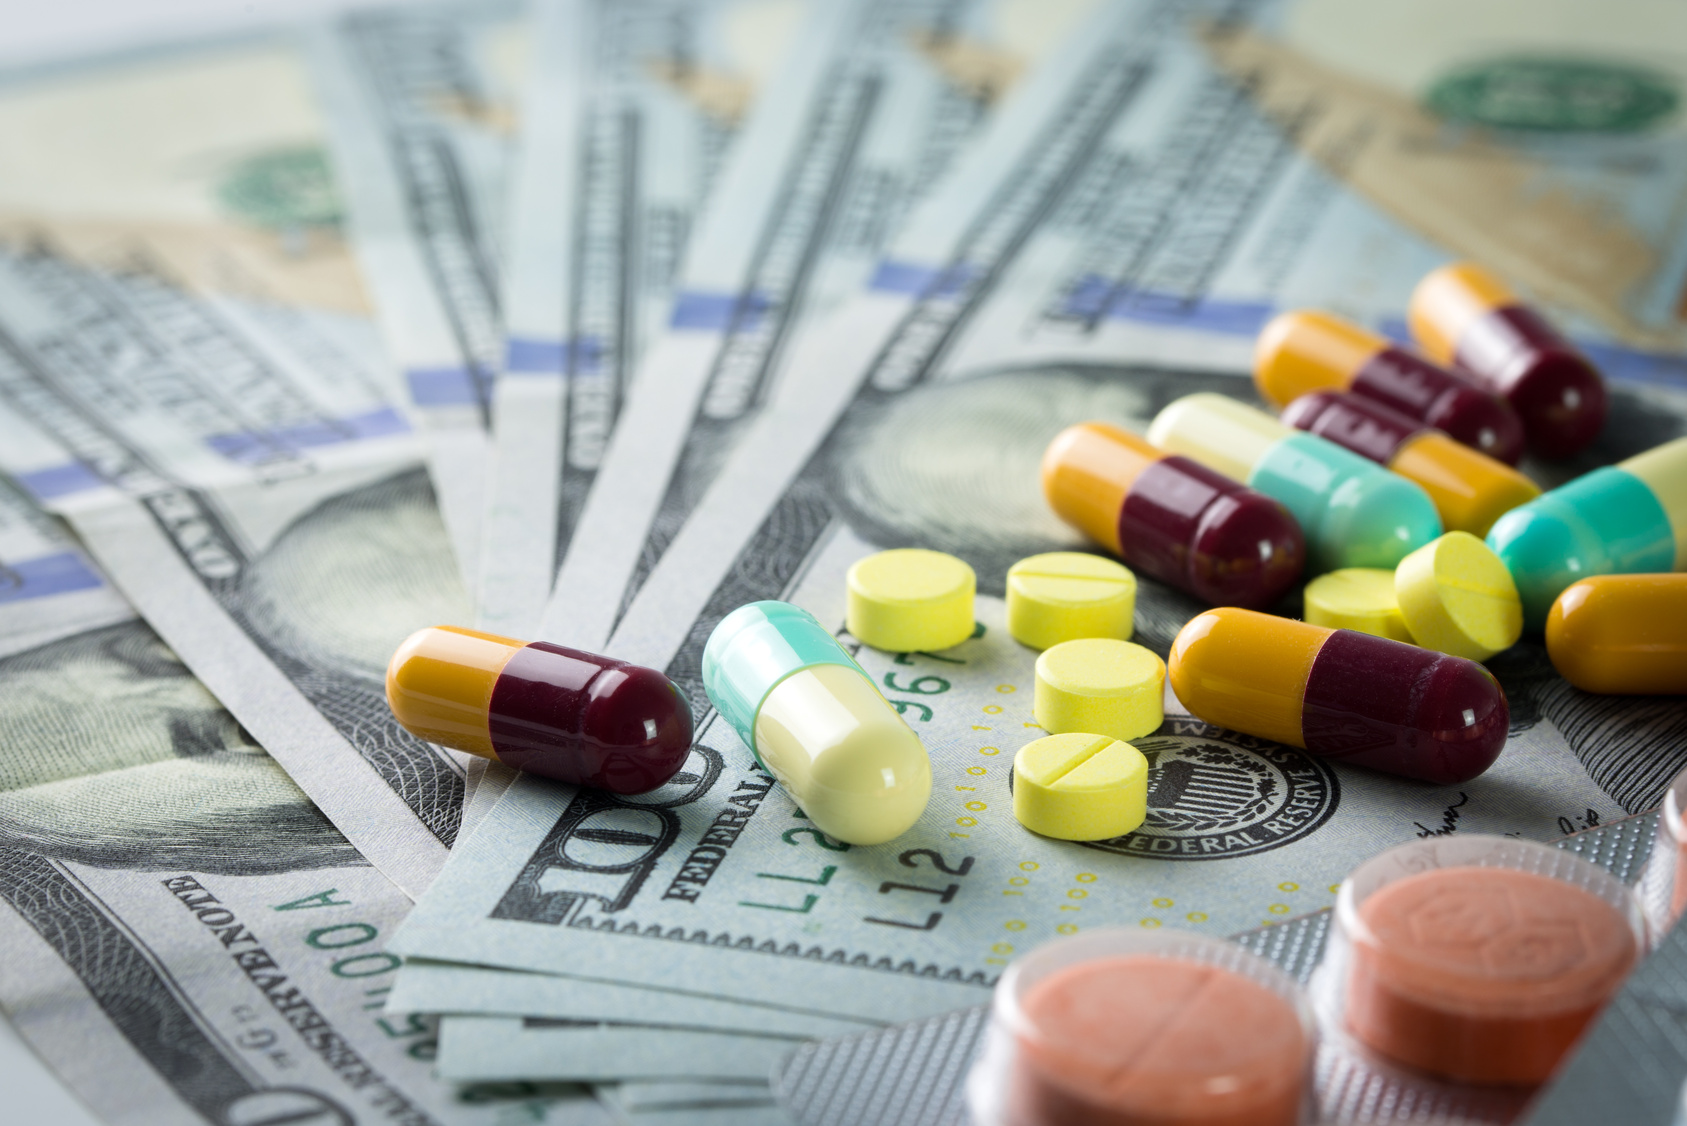 Pharma Scandal: Not Just in China